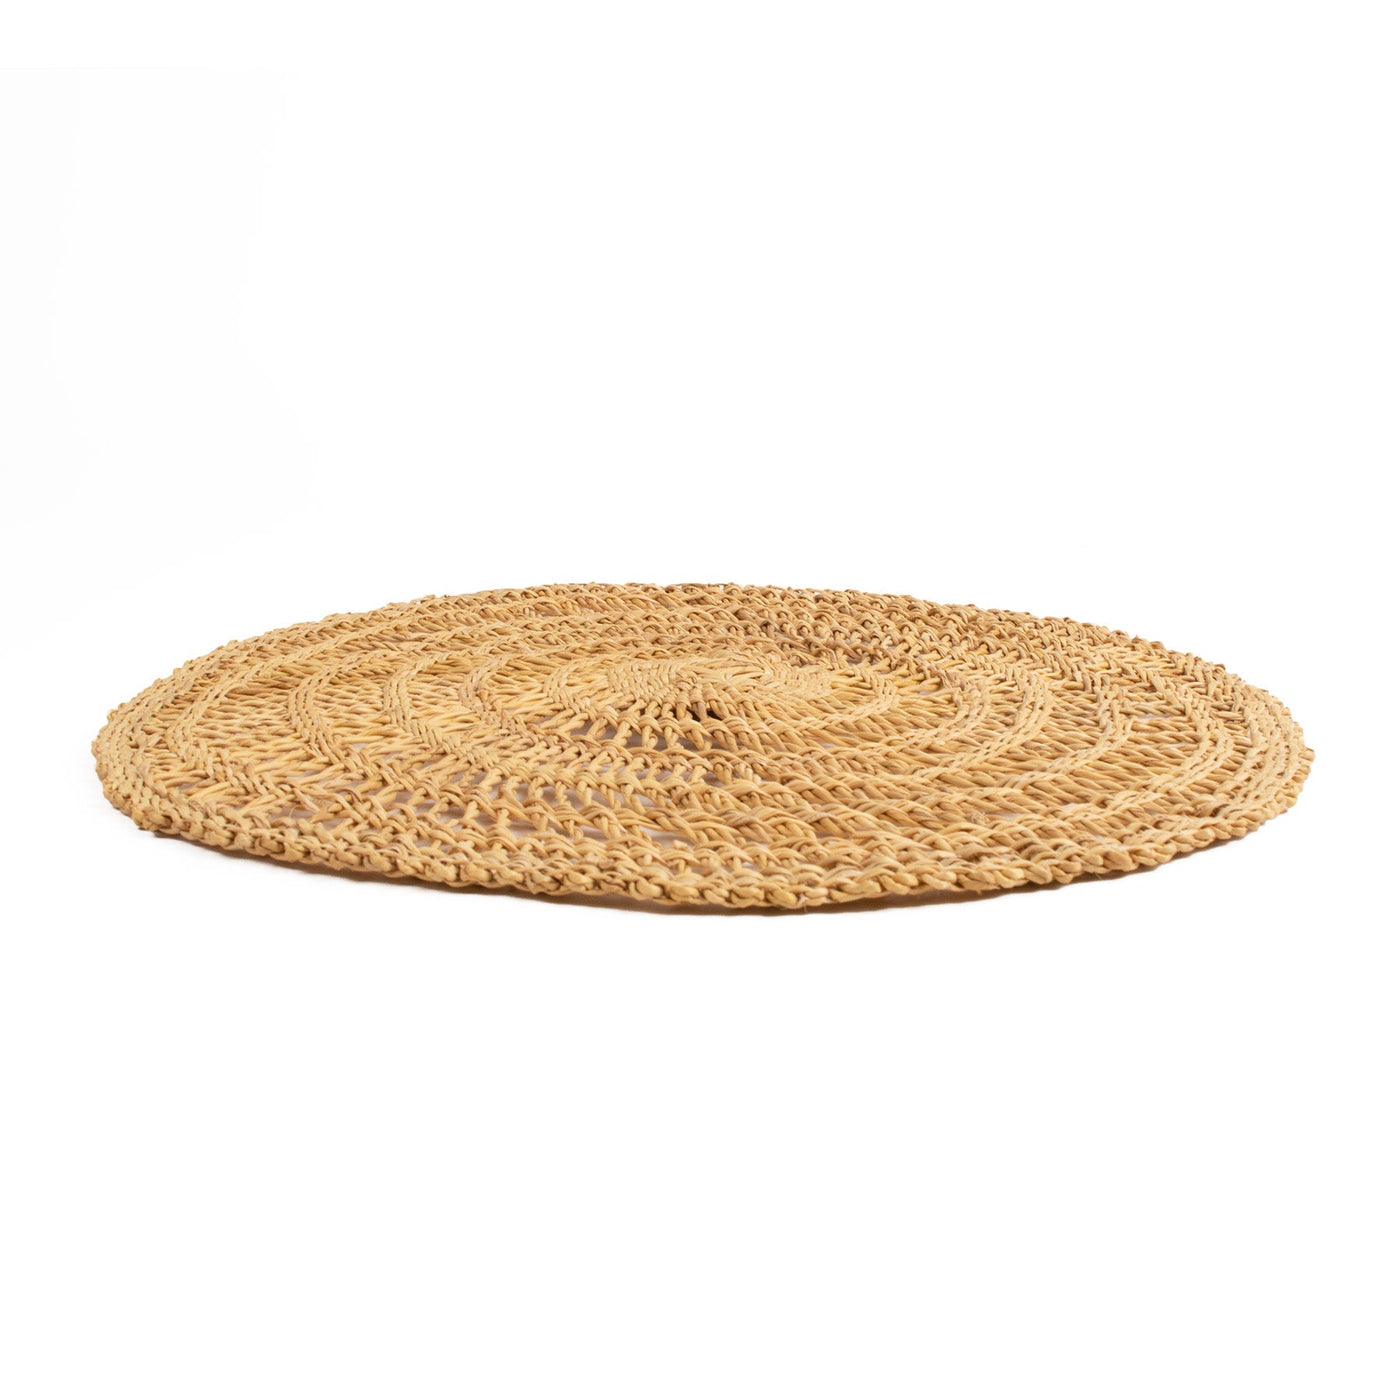 Neutral Placemats - 15" Laced Round, Set of 2